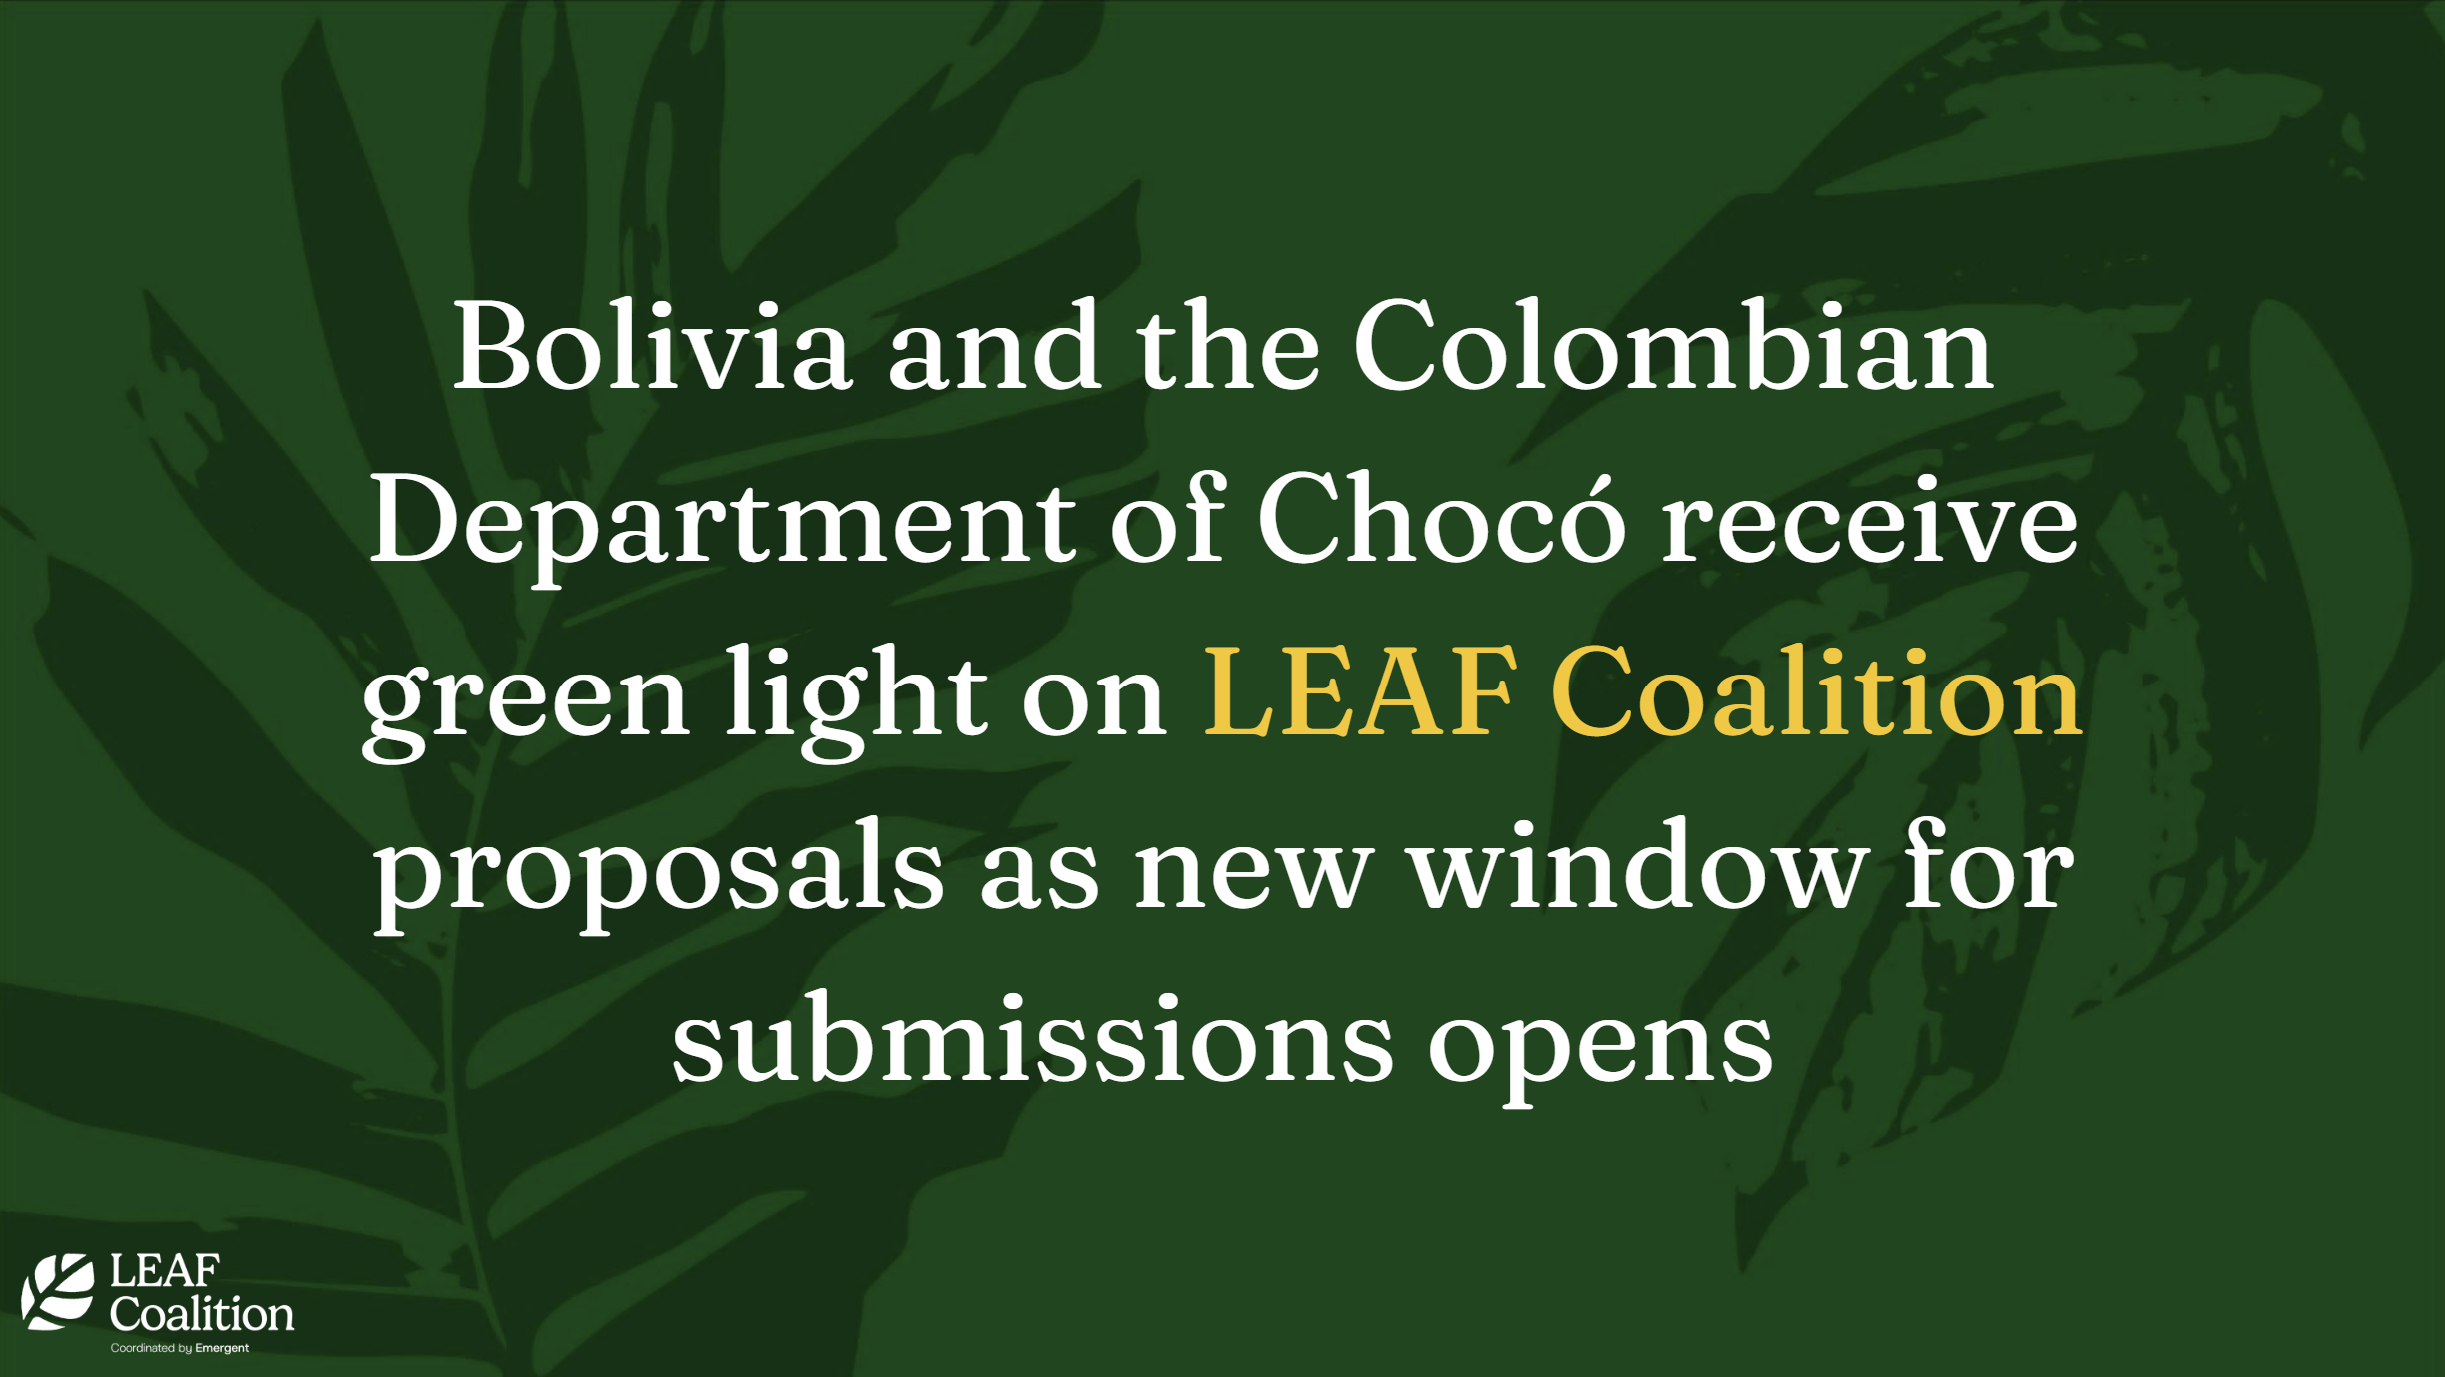 Bolivia and Colombian Department of Chocó receive green light on LEAF Coalition proposals as new window for submissions opens